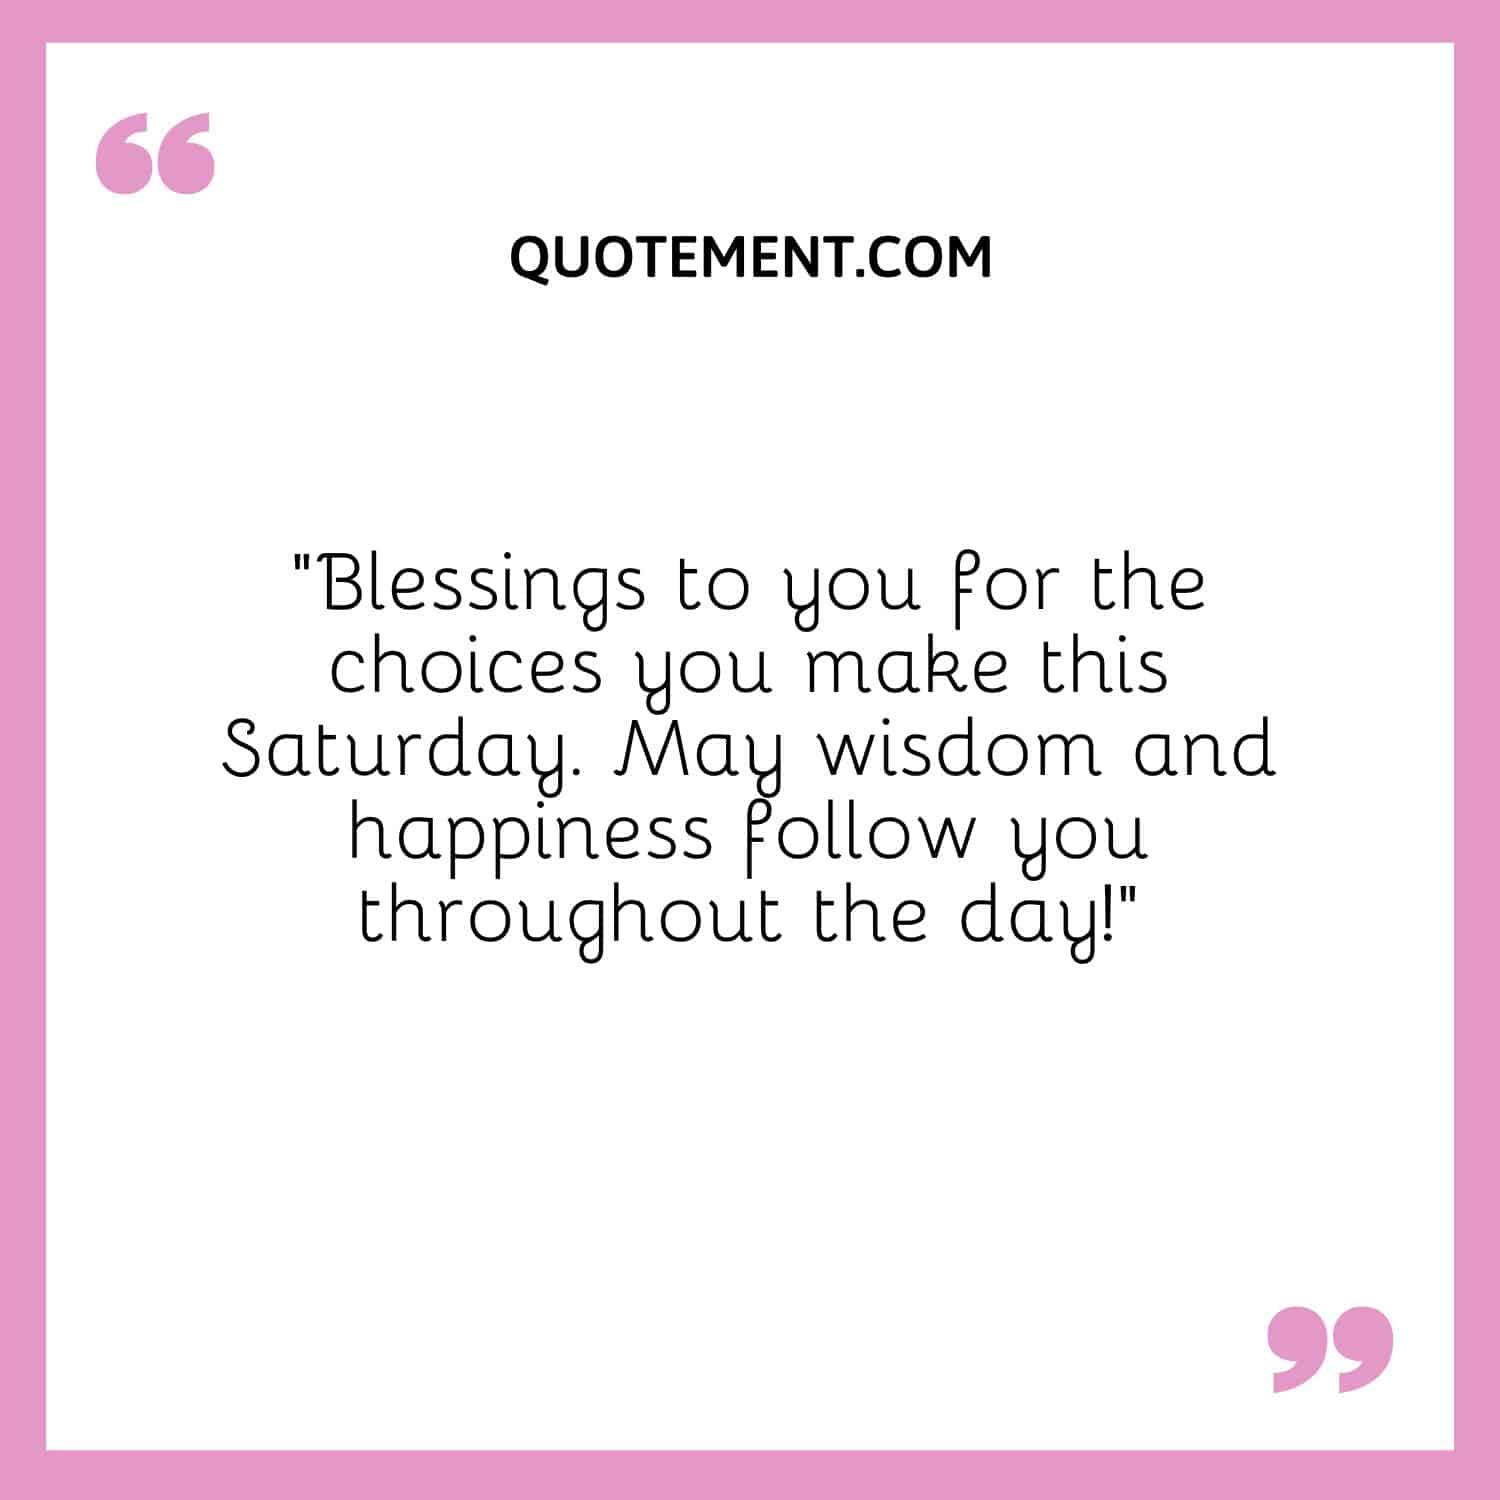 “Blessings to you for the choices you make this Saturday. May wisdom and happiness follow you throughout the day!”